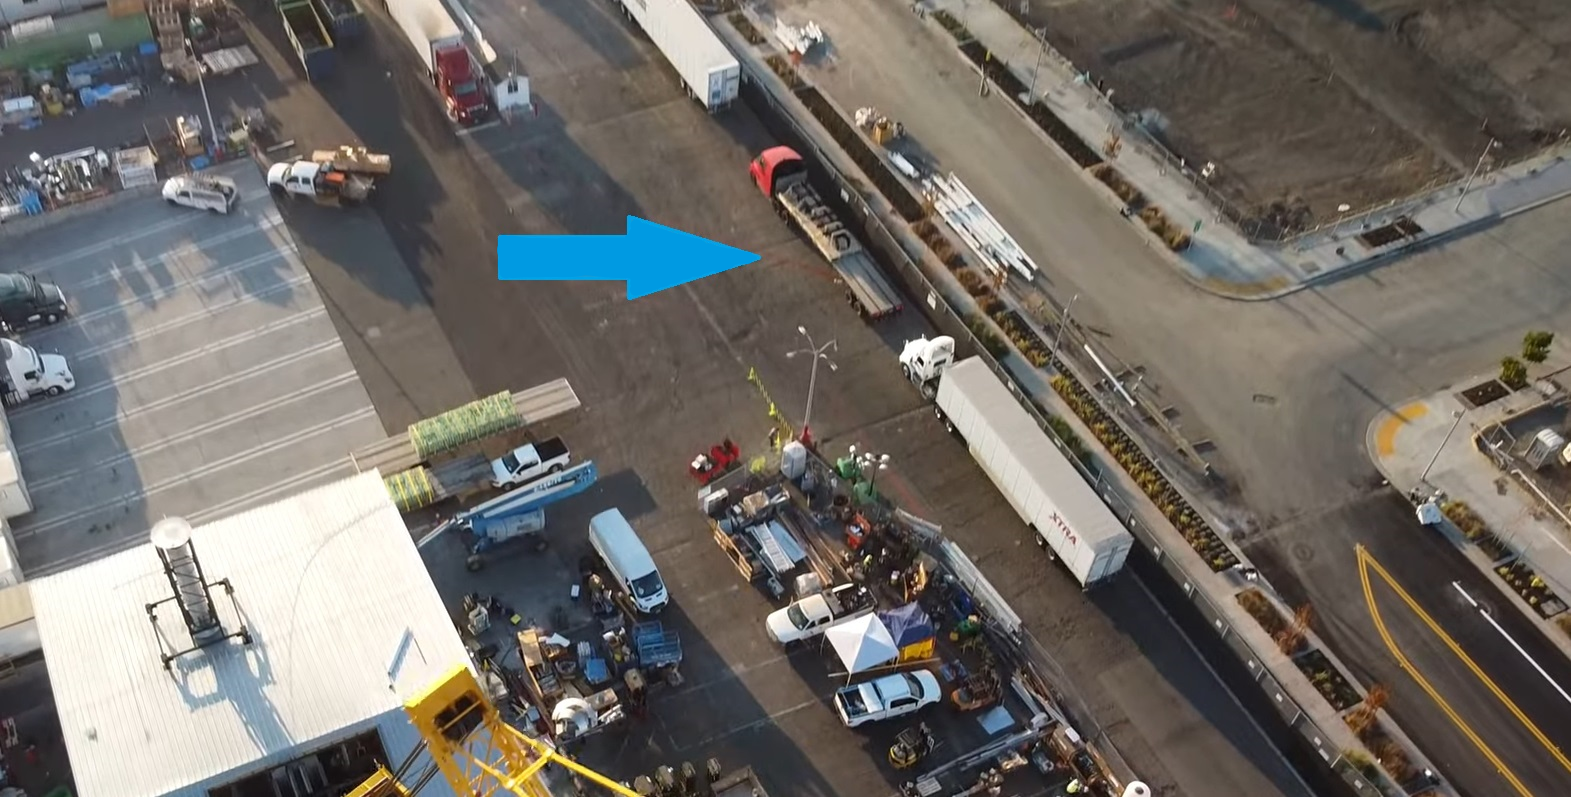 Tesla Semi Truck Spotted at Fremont Factory, Moves Cargo While Preparing for its Own Production